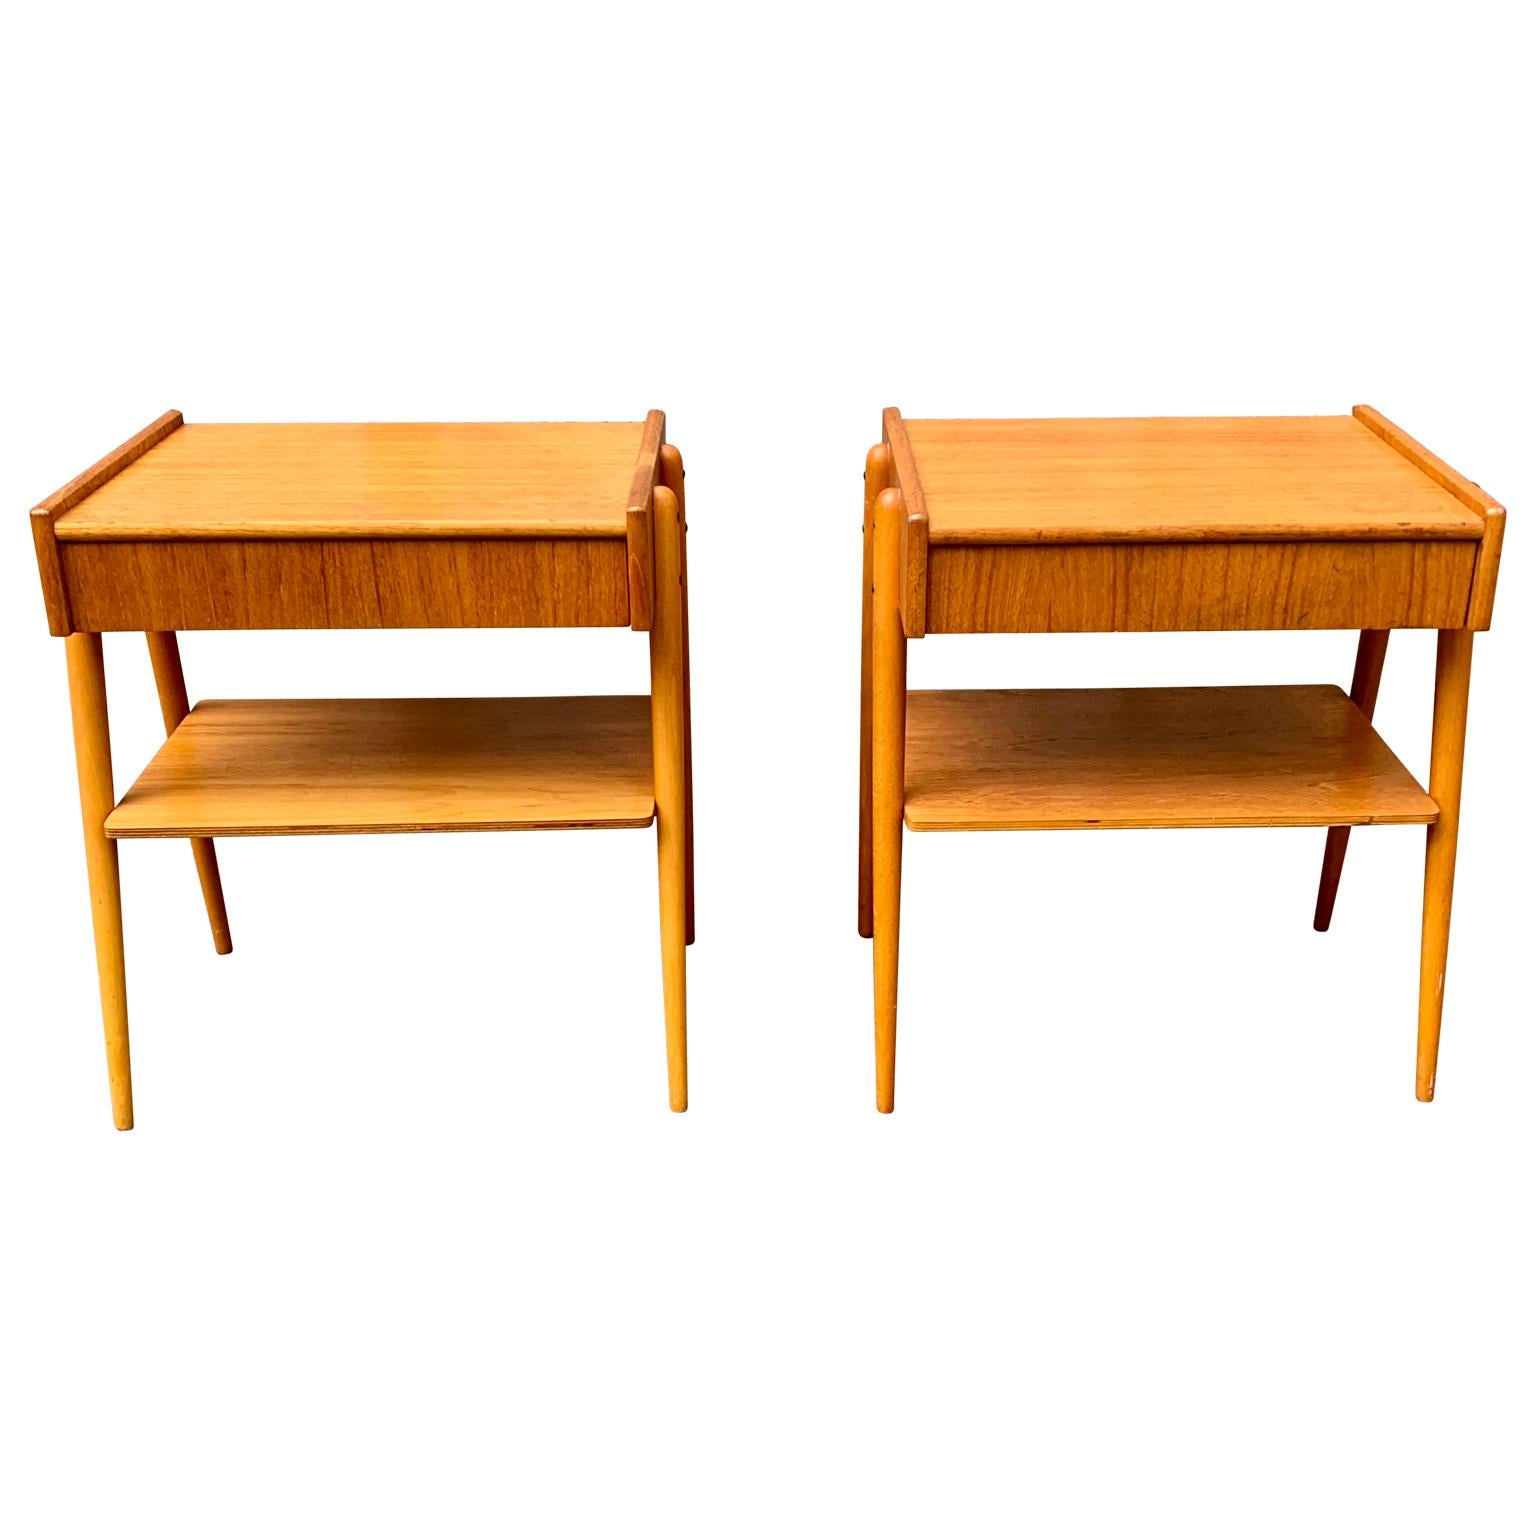 A pair of Swedish vintage nightstands or small night tables in teak wood.
The rounded legs of these bed side tables are made in beech wood and the pair each have a drawer and a shelf underneath for magazines. This pair of Scandinavian bedroom